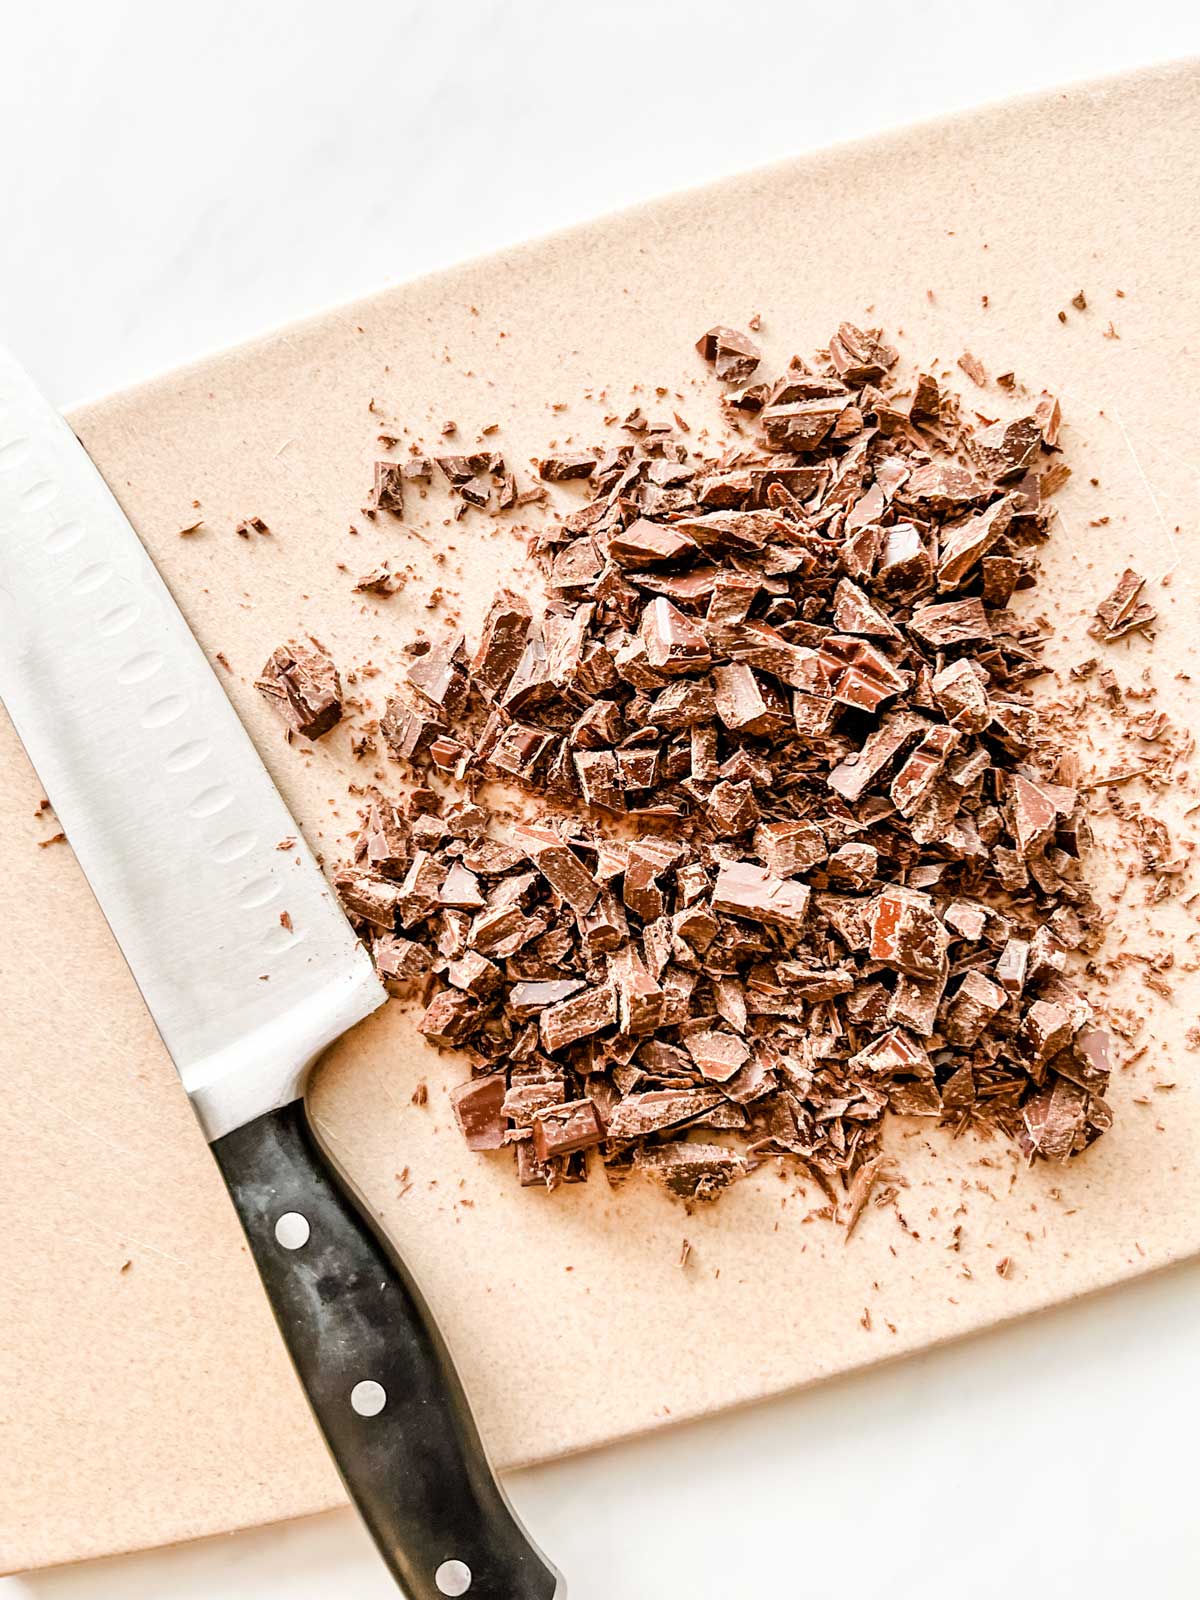 Chocolate being cut up on a cutting board.